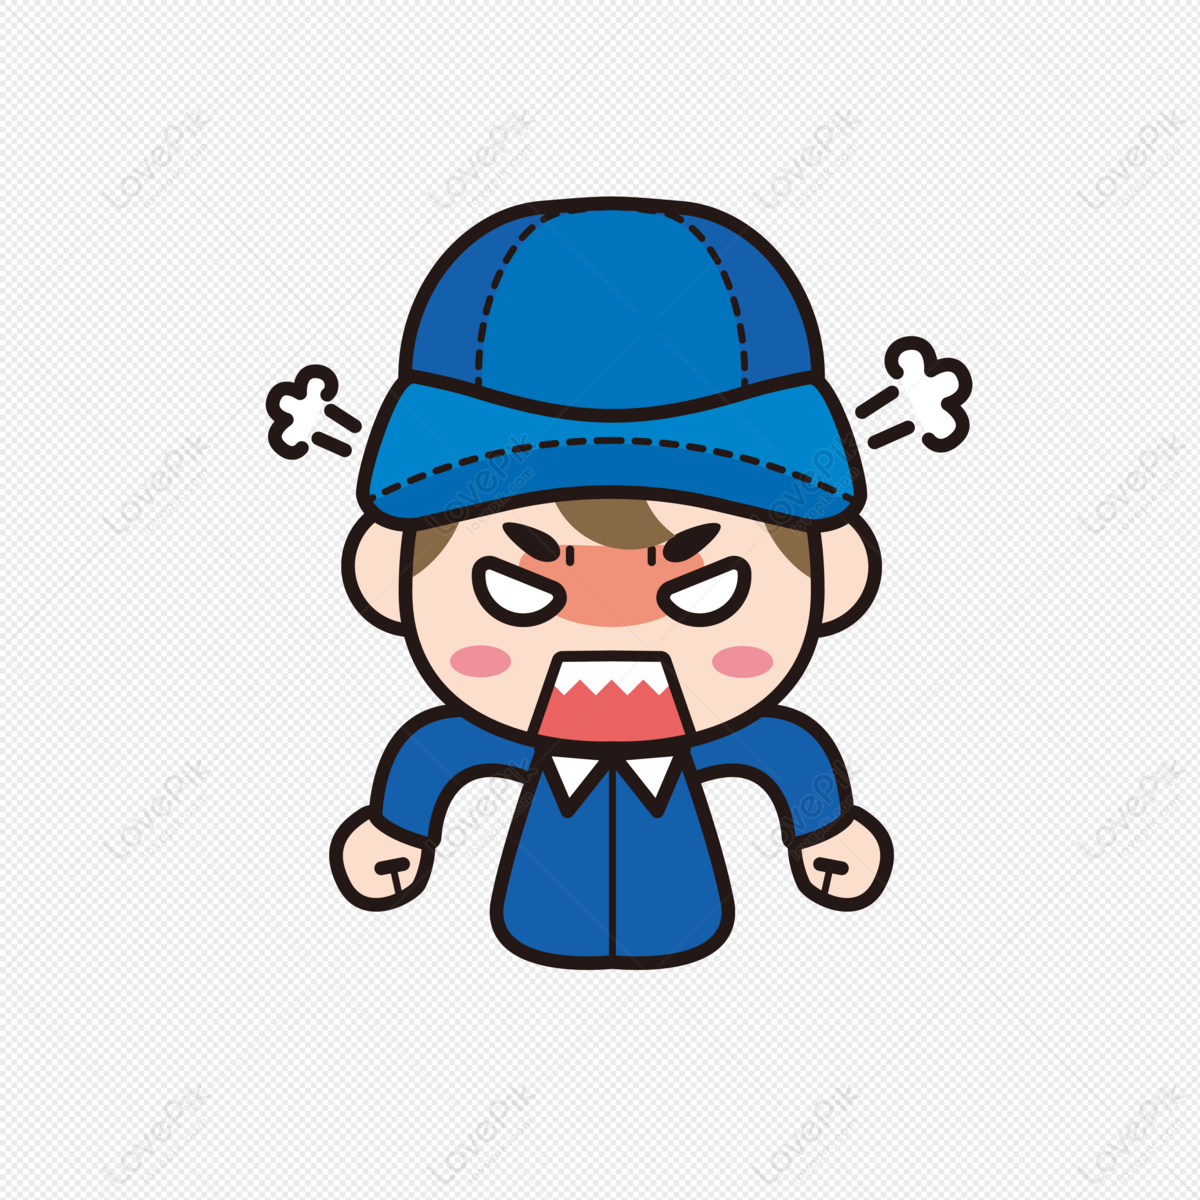 Takeaway Little Brother Anger PNG Image And Clipart Image For Free Download  - Lovepik | 401408358